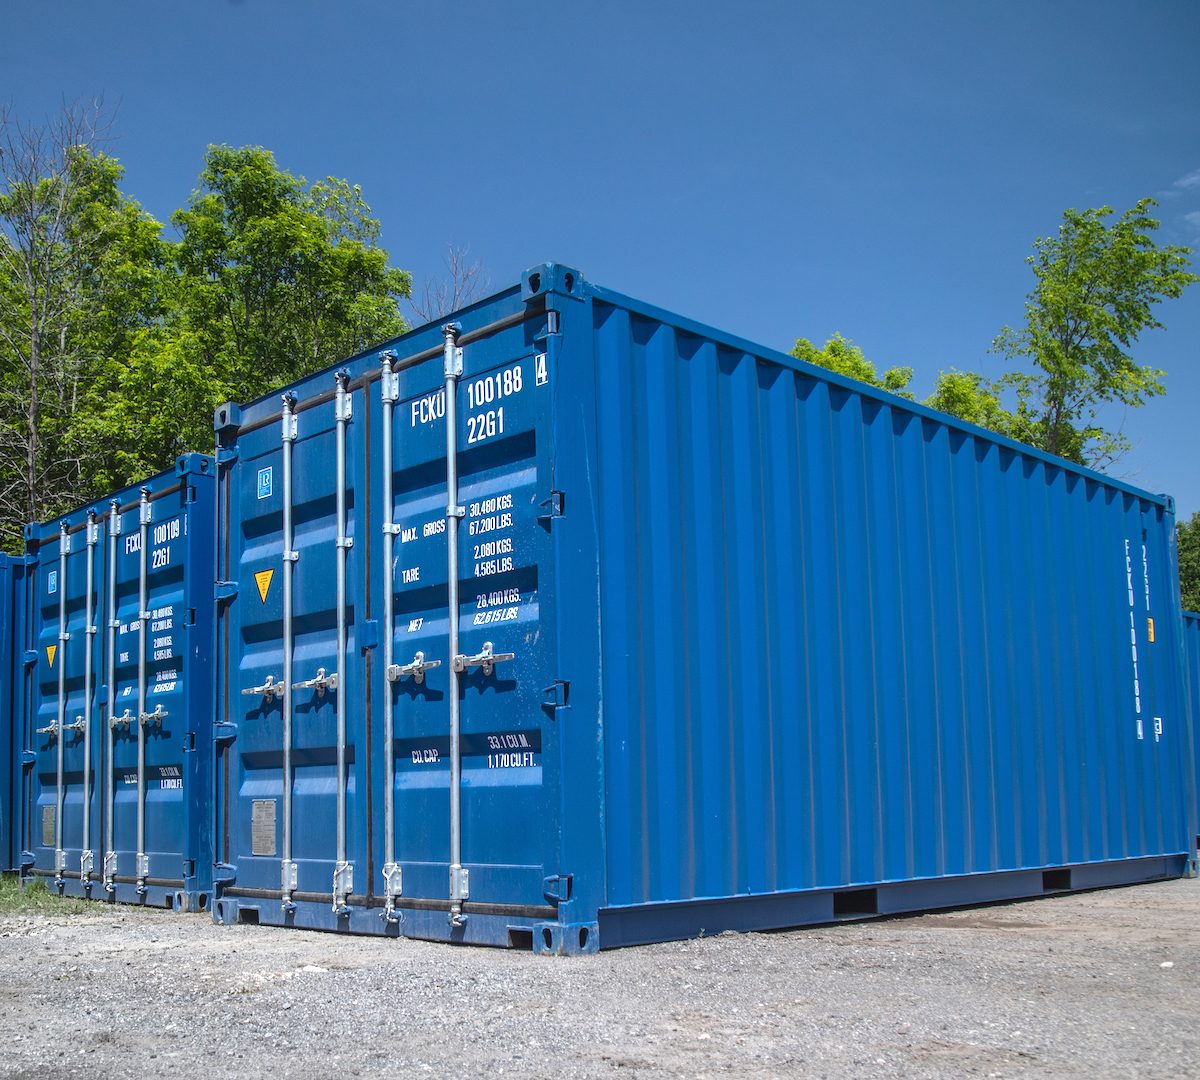 https://spacesstorage.ca/wp-content/uploads/elementor/thumbs/SSG-Shipping-Container-Rental-1200x1080-1-plrr9m585055p1tf50mtvrpv5ar13iftmo7ecoq48w.jpg